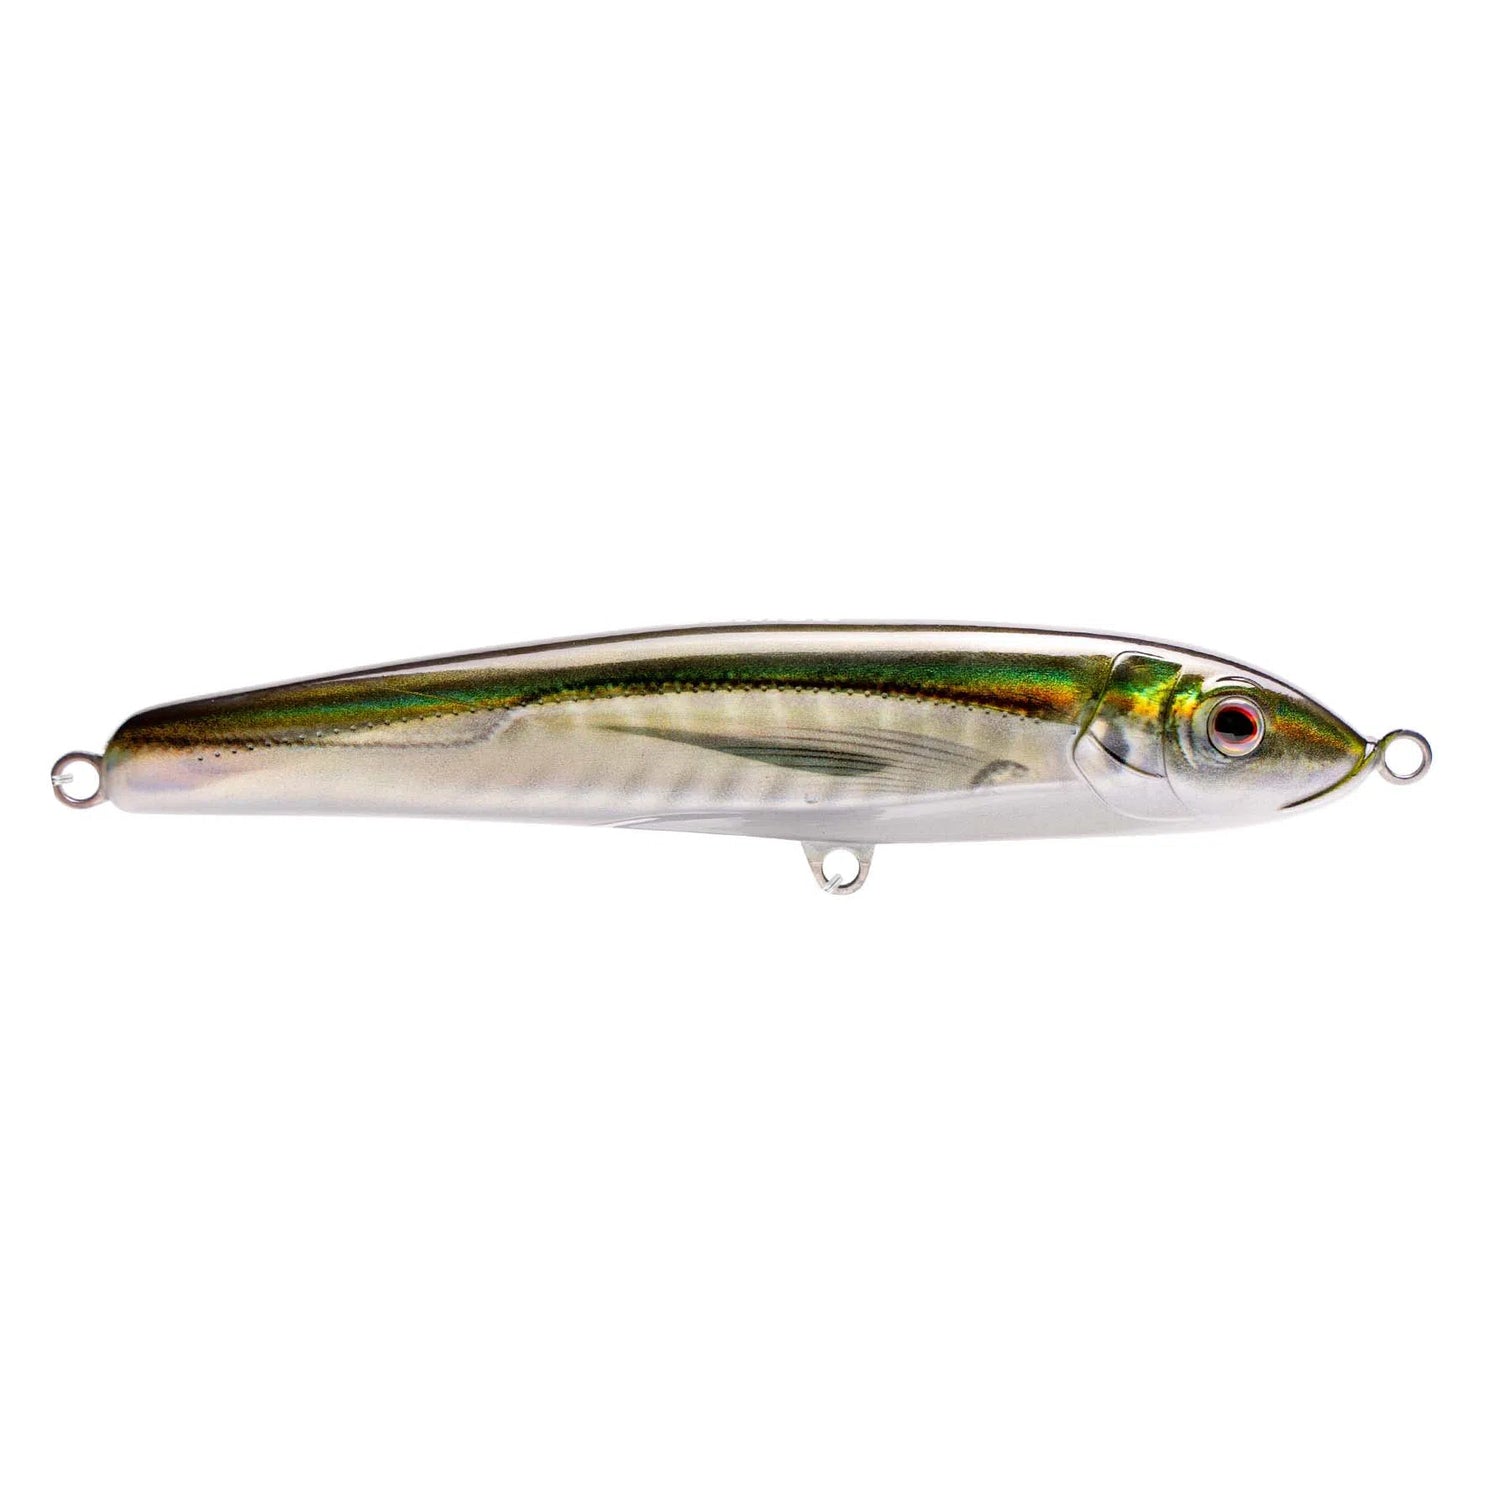 Nomad Design Riptide Fast Sinking Long Cast Lure-Lure - Poppers, Stickbaits & Pencils-Nomad-Olive Back Shad-105mm-Fishing Station